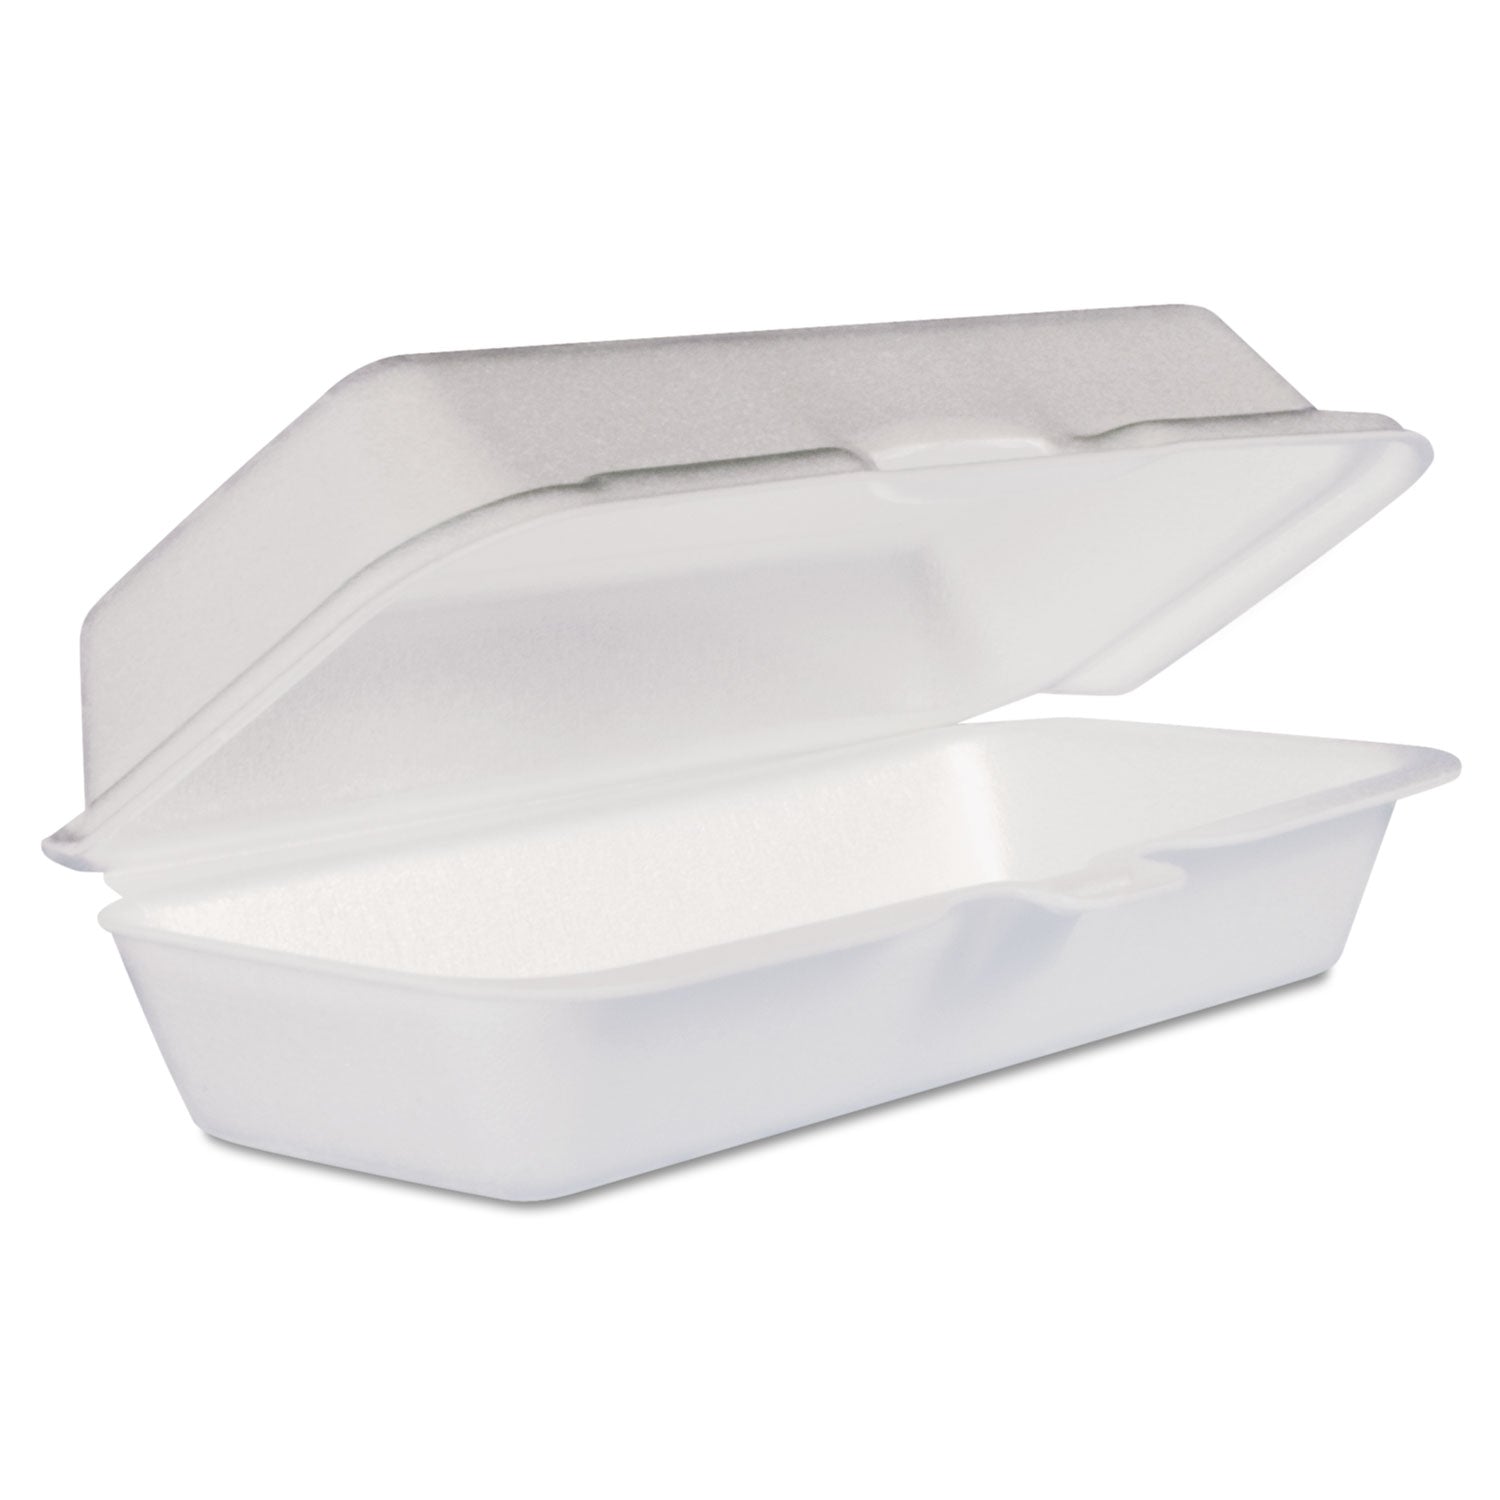 Foam Hinged Lid Container, Hot Dog Container, 3.8 x 7.1 x 2.3, White,125/Bag, 4 Bags/Carton - 